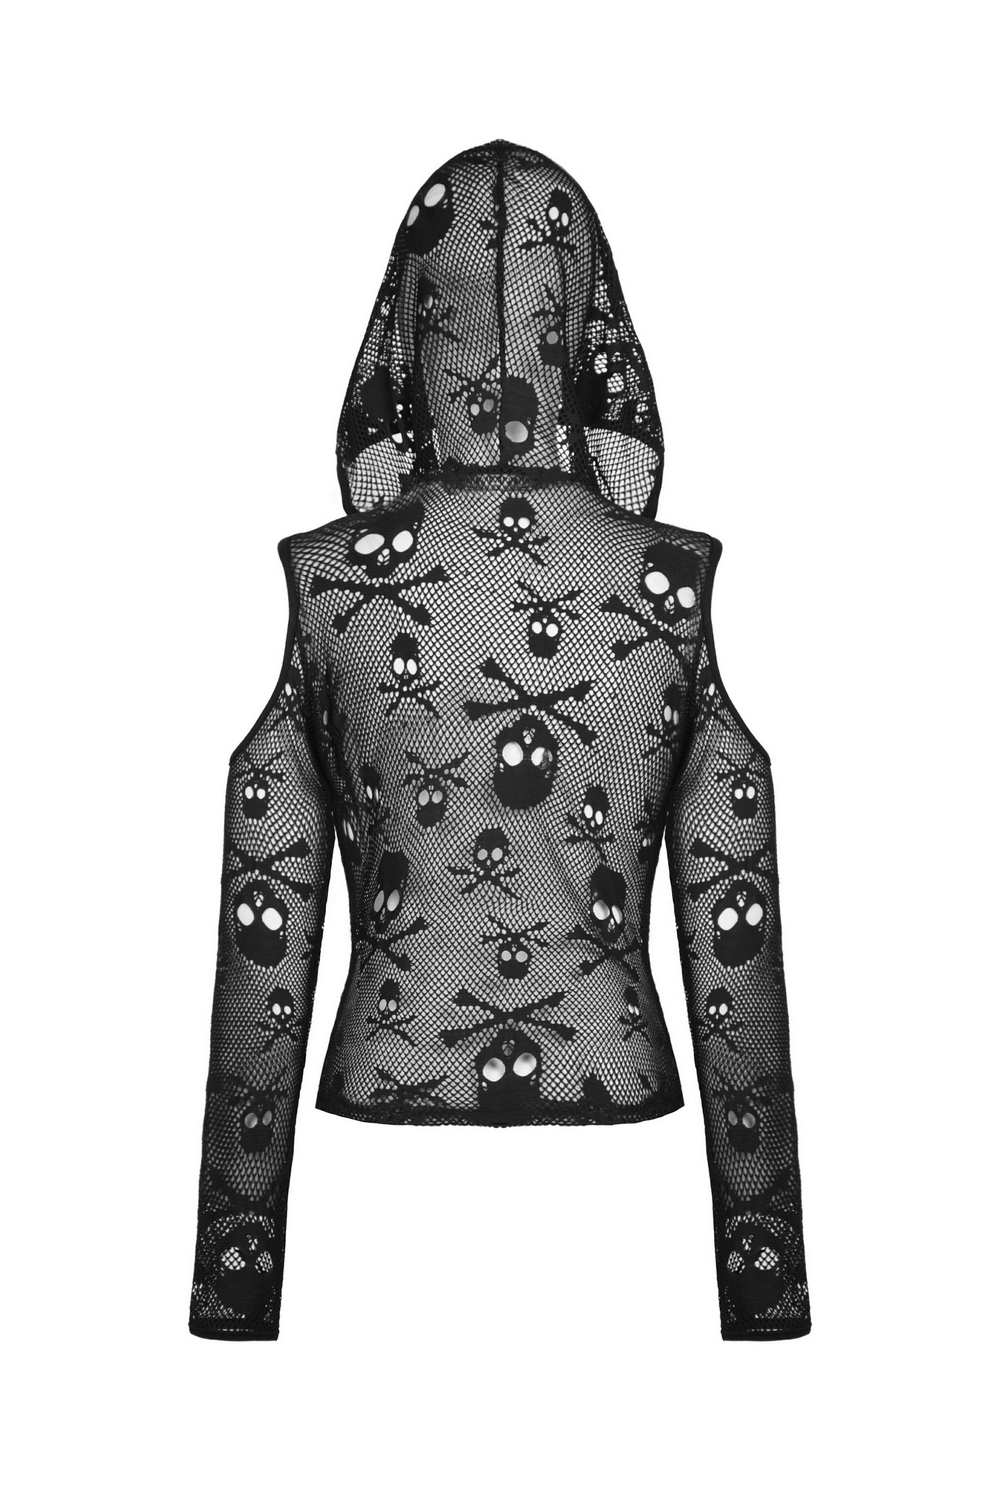 Gothic Skull Mesh Cold Shoulder Hooded Top for Edgy Style